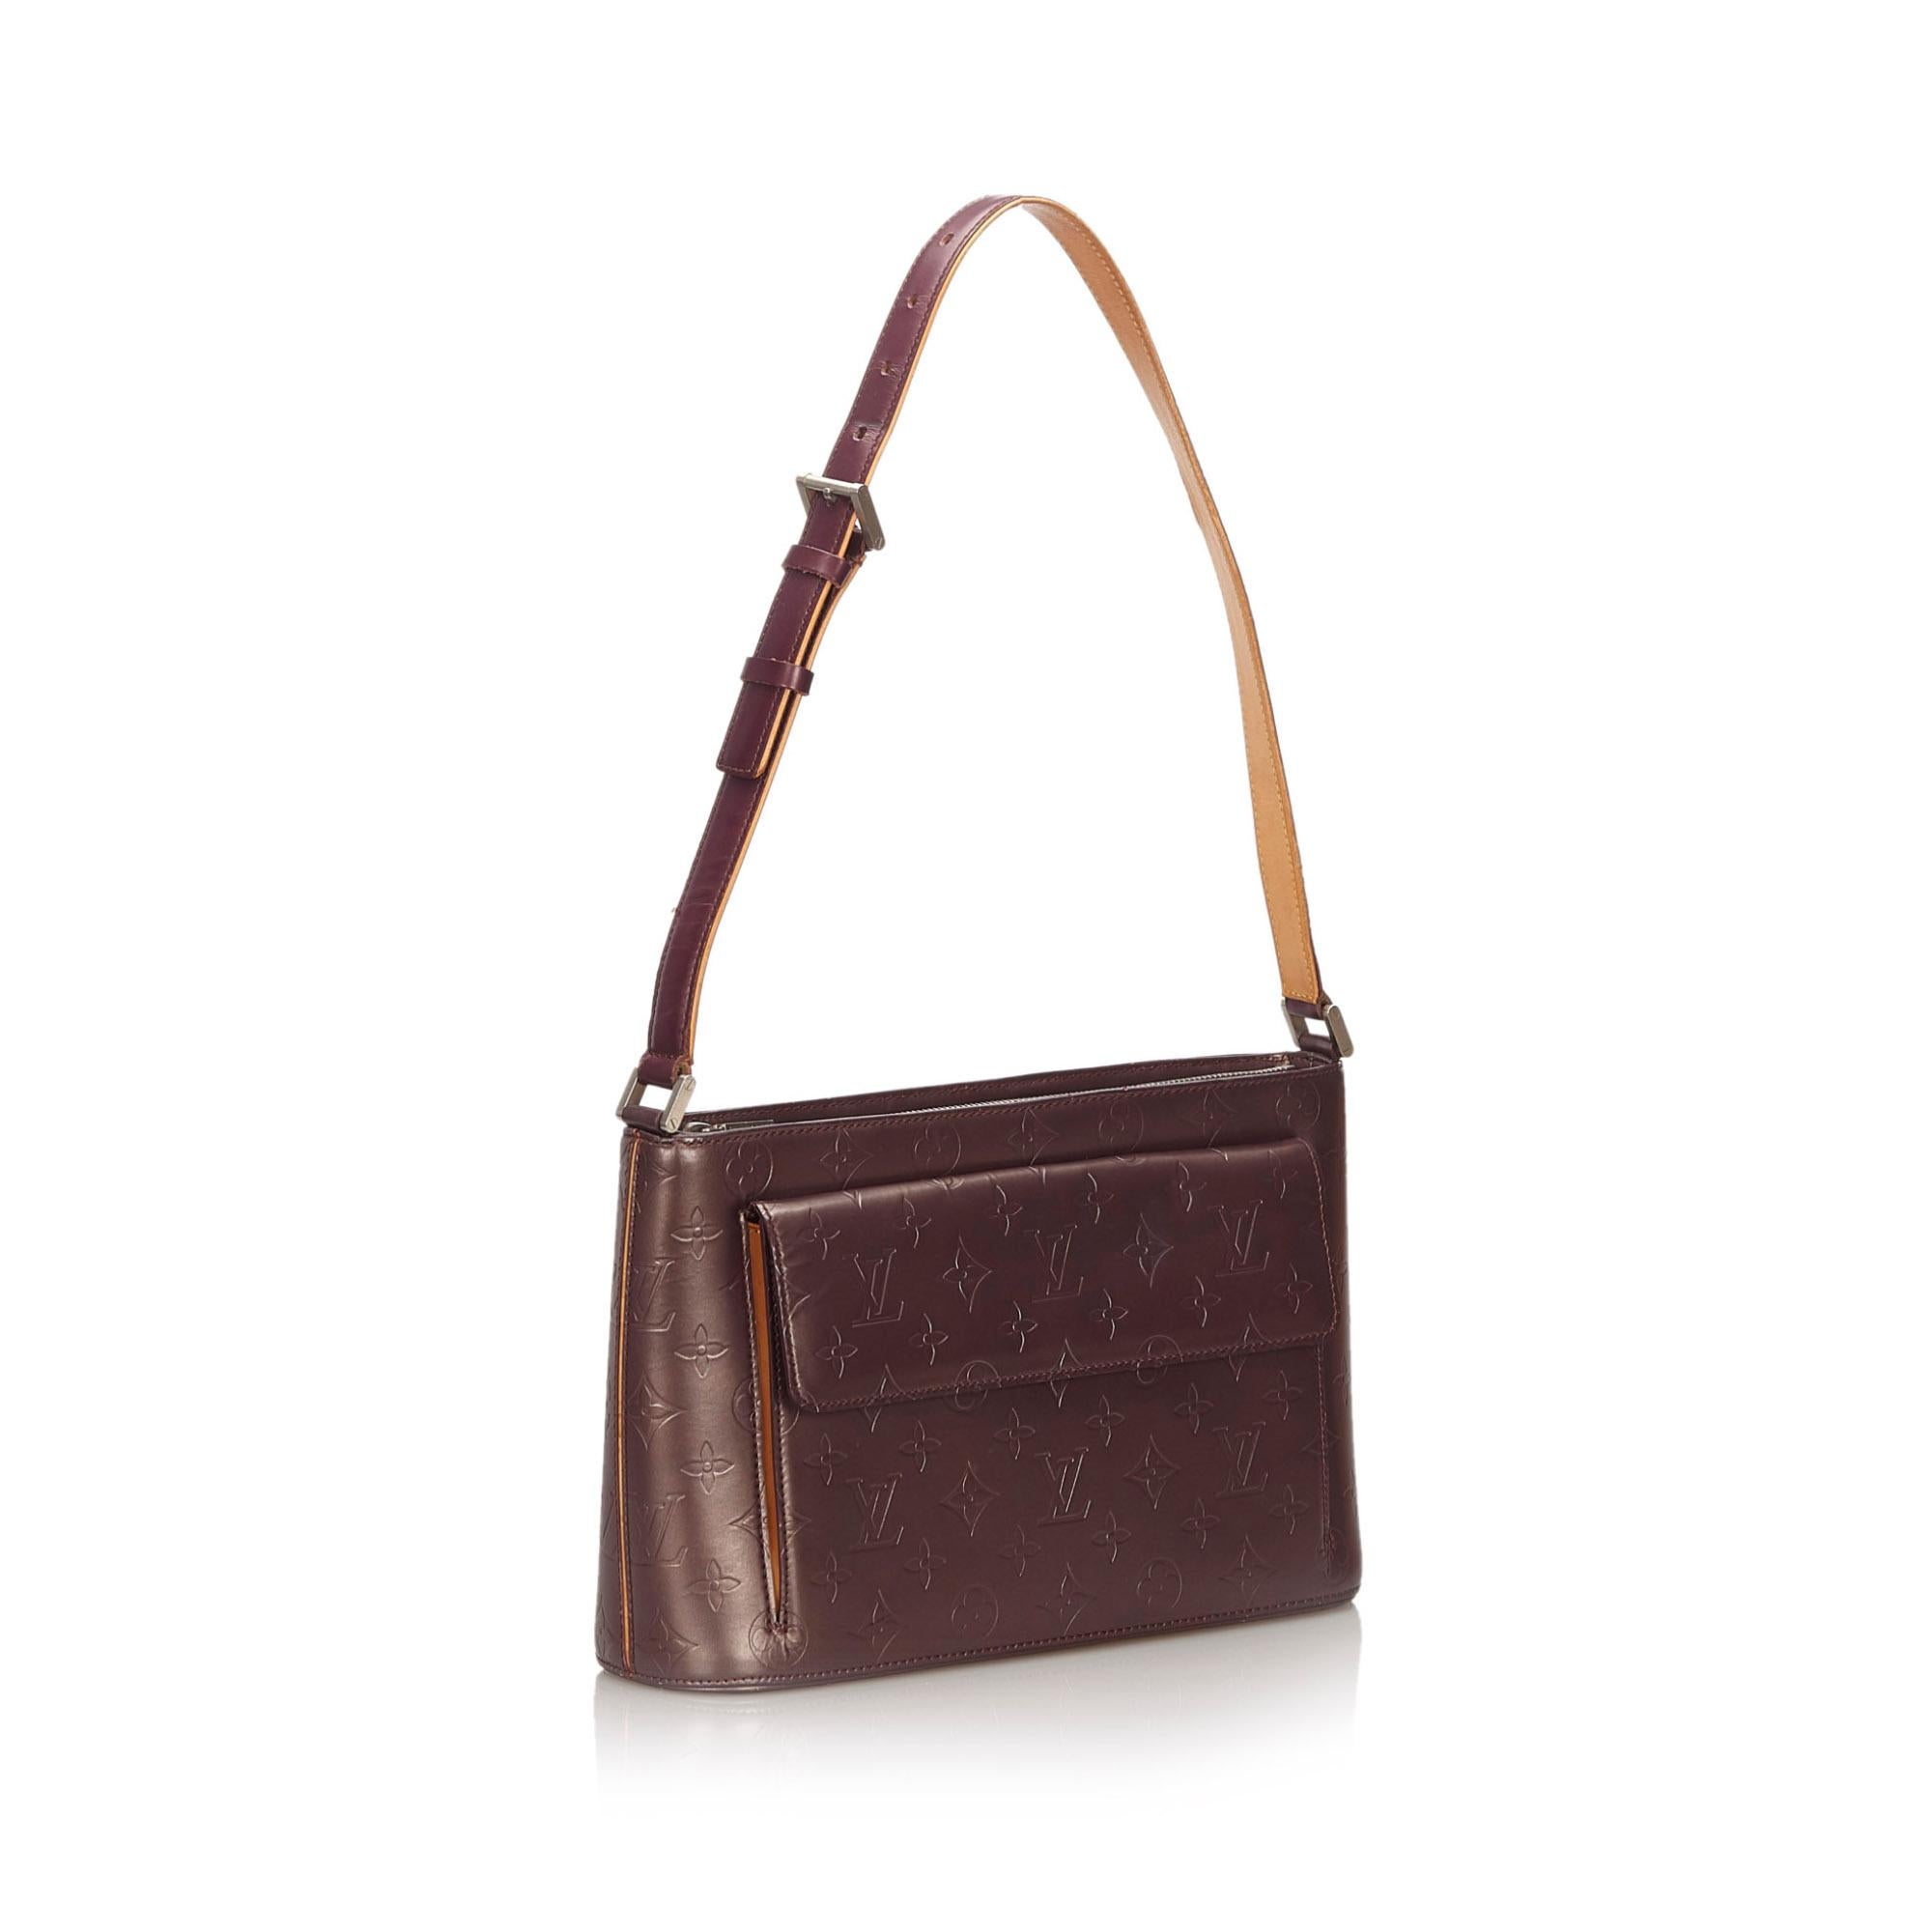 The Alston features a monogram mat body, an adjustable leather shoulder strap, a front exterior flap pocket, a top zip closure, and an interior slip pocket. It carries as B+ condition rating.

Inclusions: 
This item does not come with